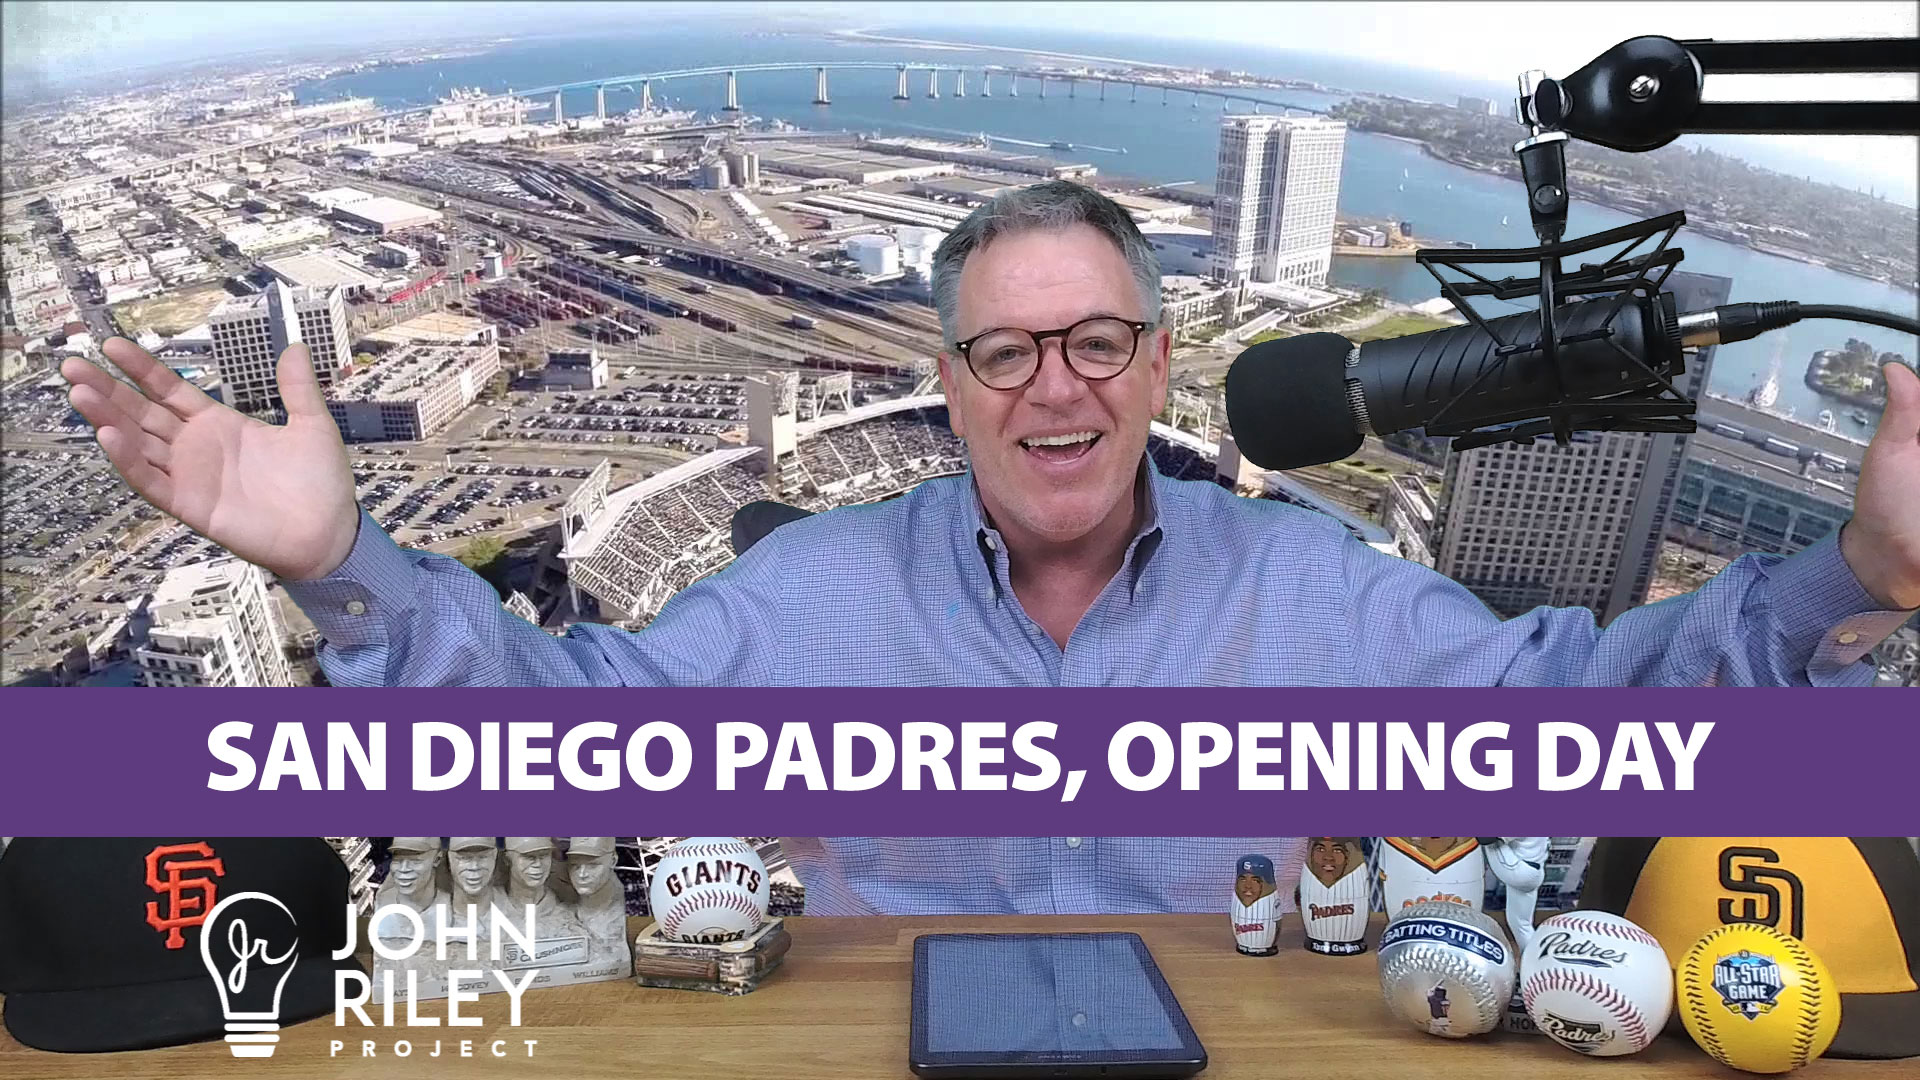 San Diego Padres, Opening Day, John Riley Project